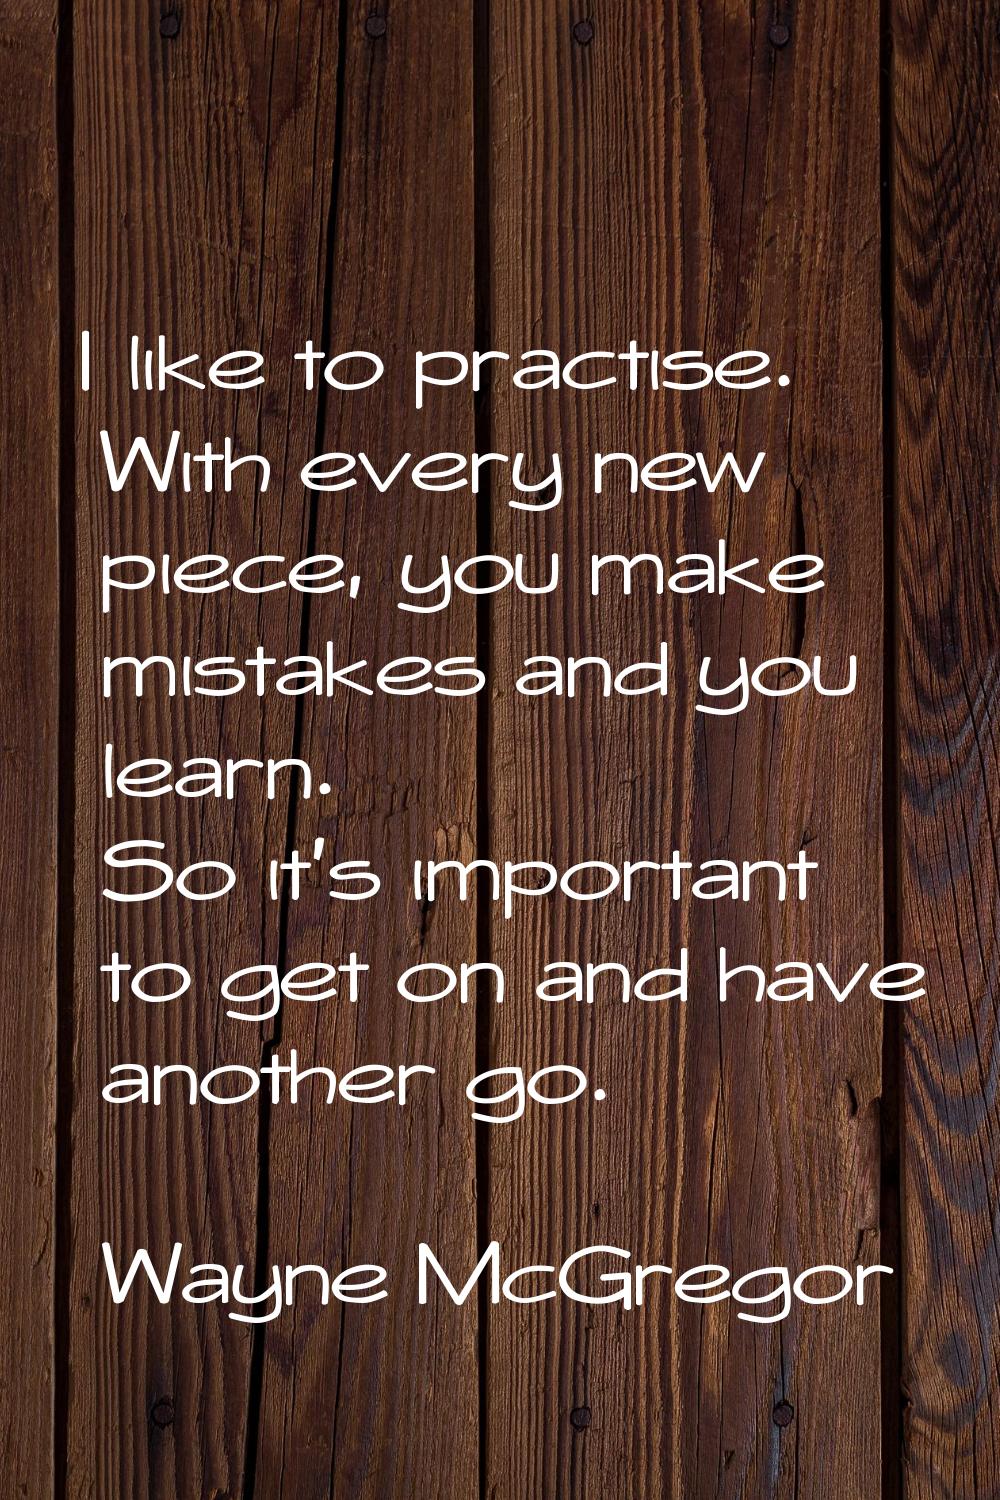 I like to practise. With every new piece, you make mistakes and you learn. So it's important to get